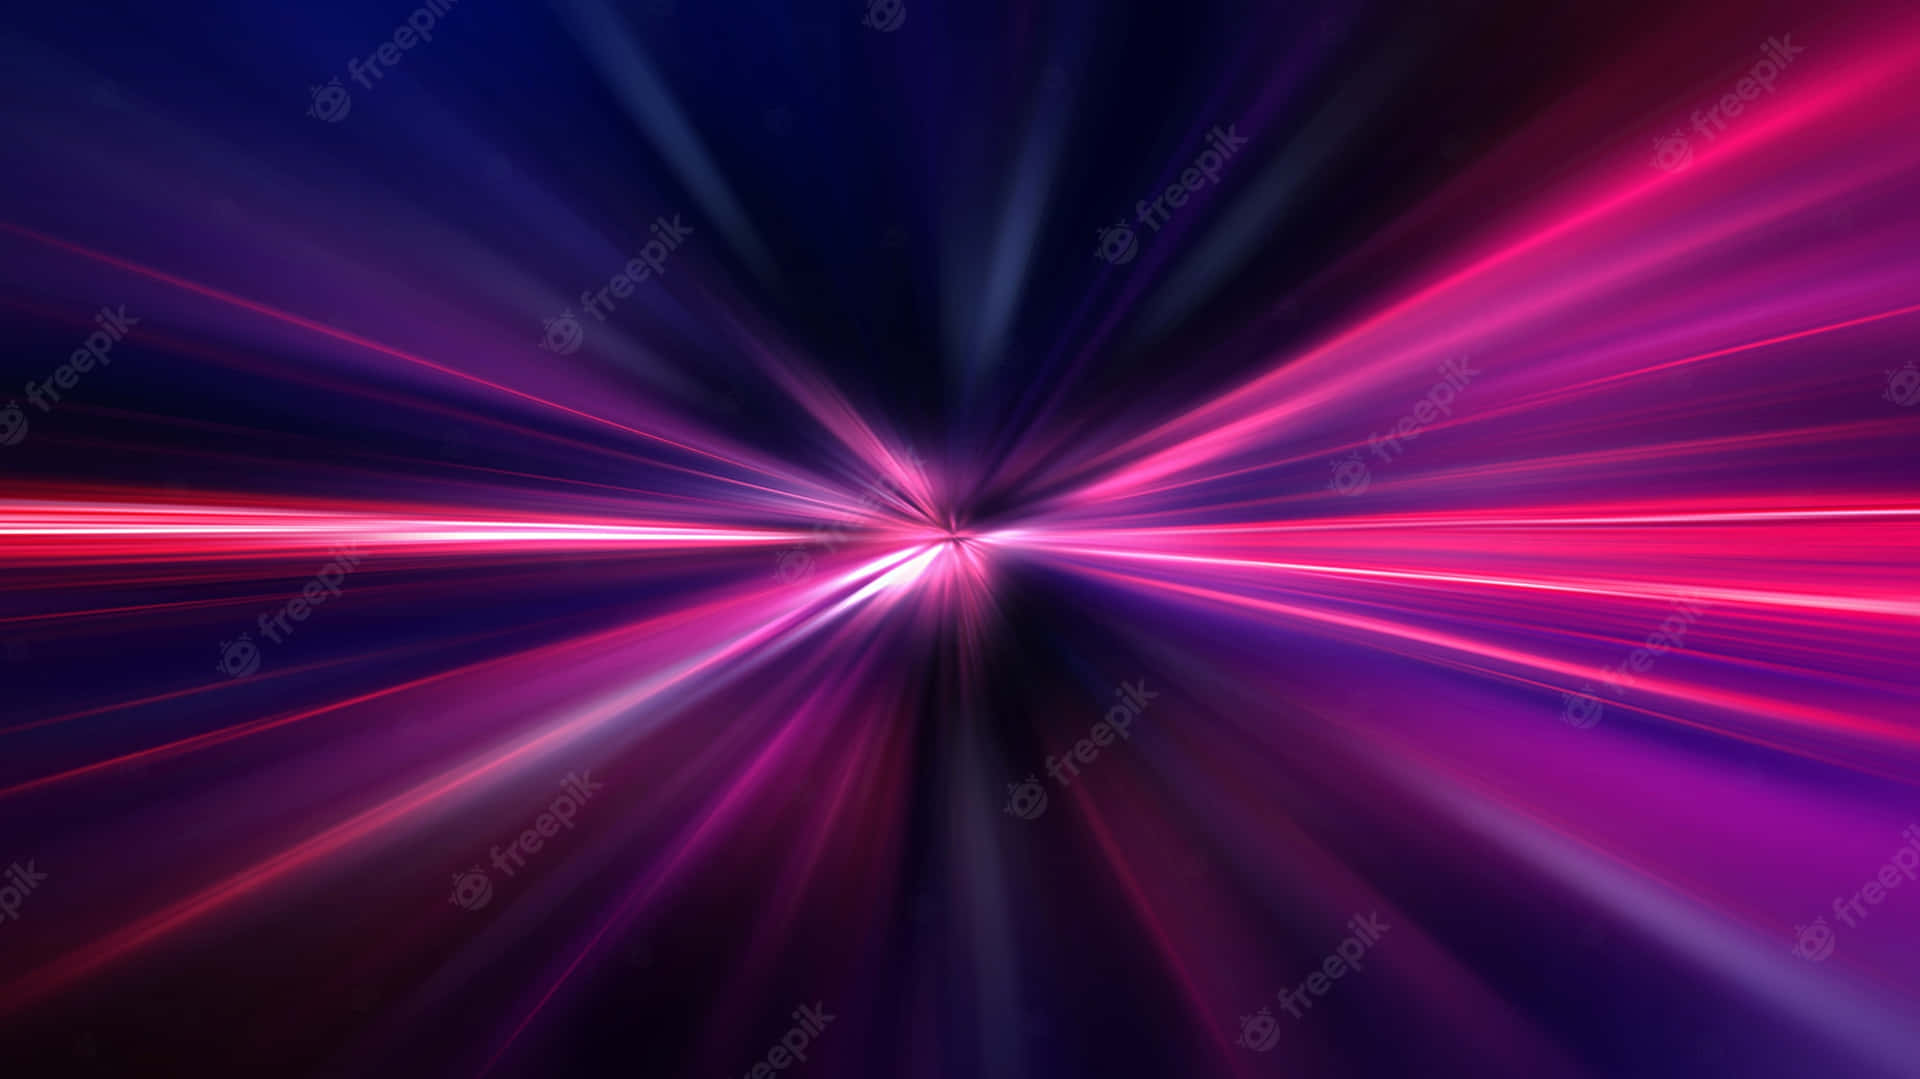 A Purple And Pink Light Burst Background Wallpaper